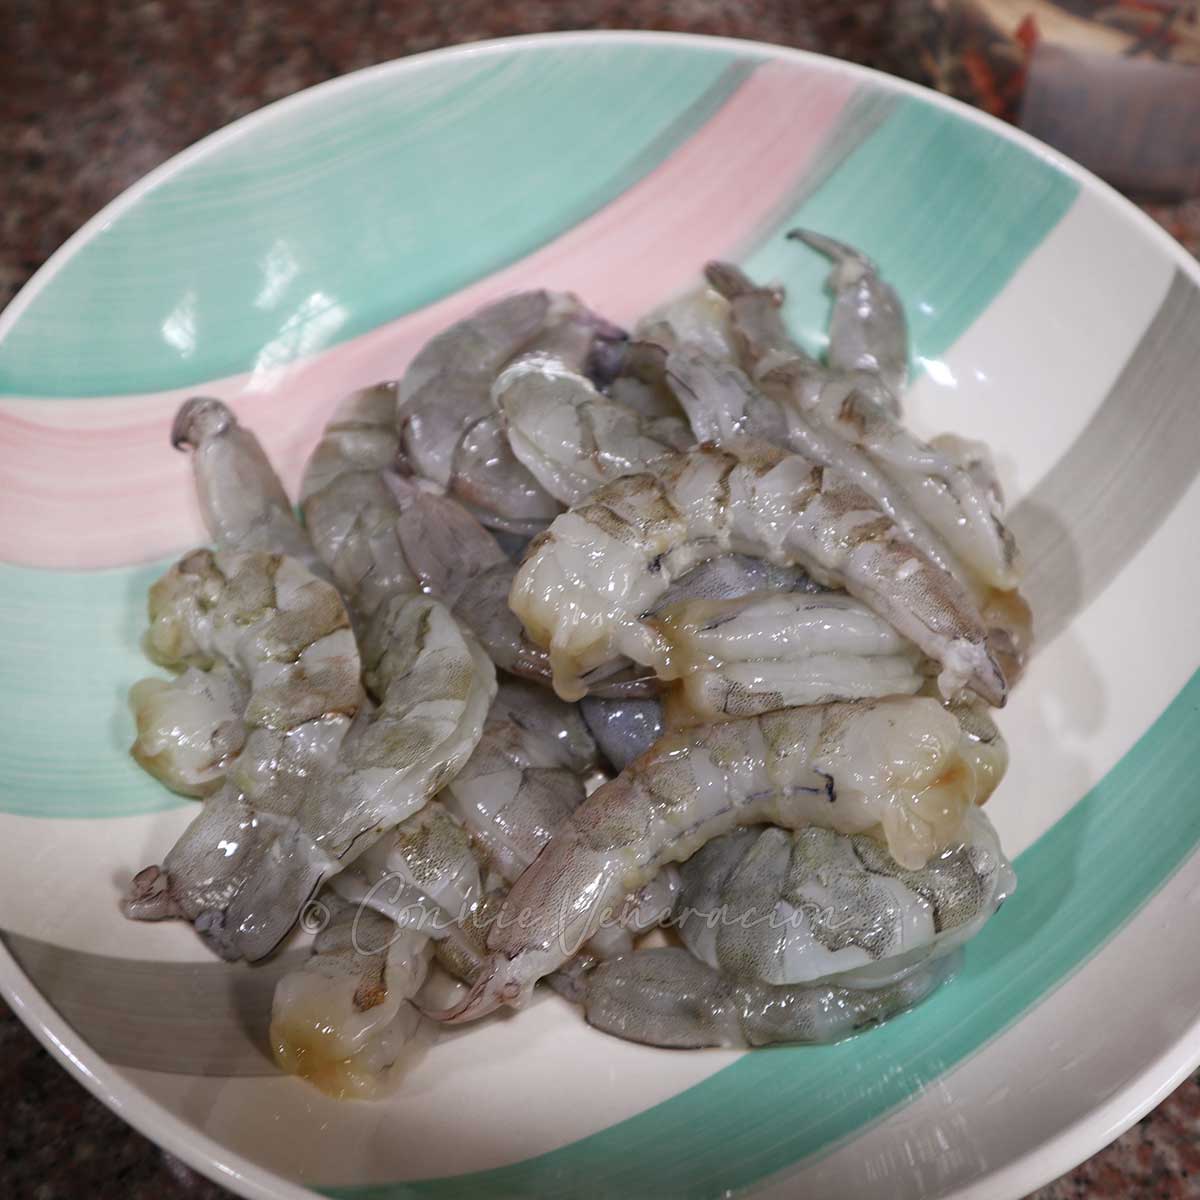 Raw shrimps, peeled and deveined